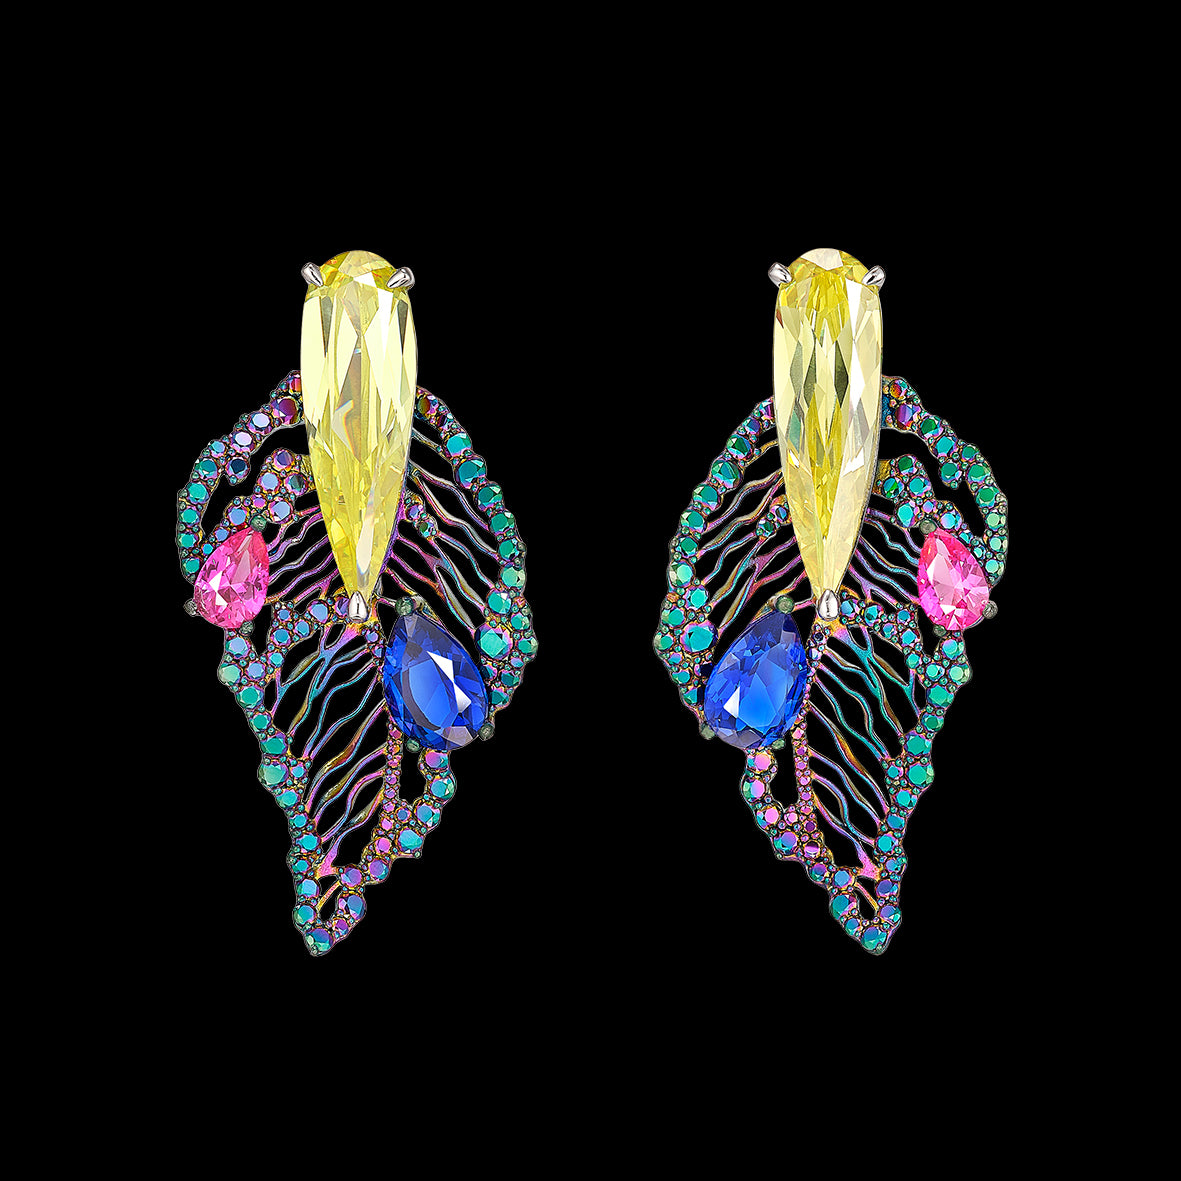 Rainbow Canary Titan Earrings, Earring, Anabela Chan Joaillerie - Fine jewelry with laboratory grown and created gemstones hand-crafted in the United Kingdom. Anabela Chan Joaillerie is the first fine jewellery brand in the world to champion laboratory-grown and created gemstones with high jewellery design, artisanal craftsmanship and a focus on ethical and sustainable innovations.